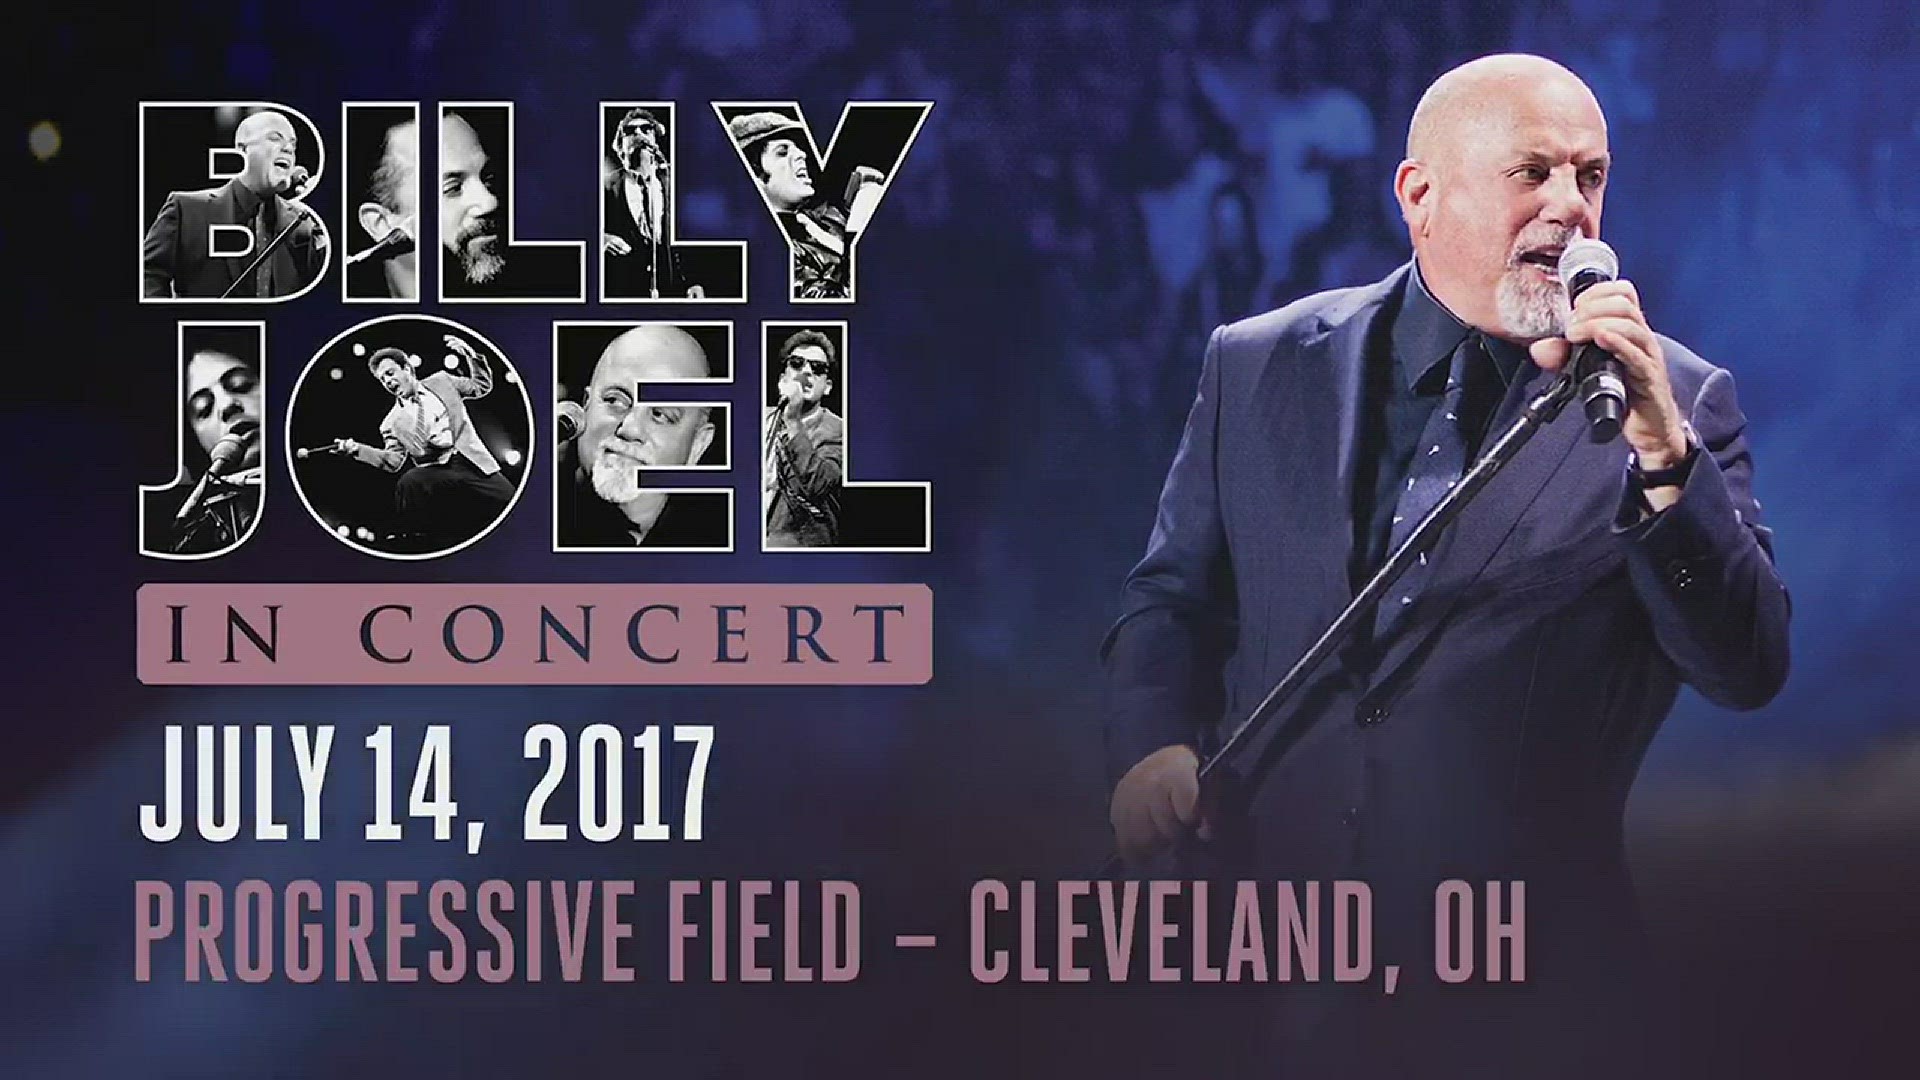 January 5, 2017: Rock 'n' roll icon Billy Joel was revealed as the 'major' concert announcement. He will perform at Progressive Field on Friday, July 14.